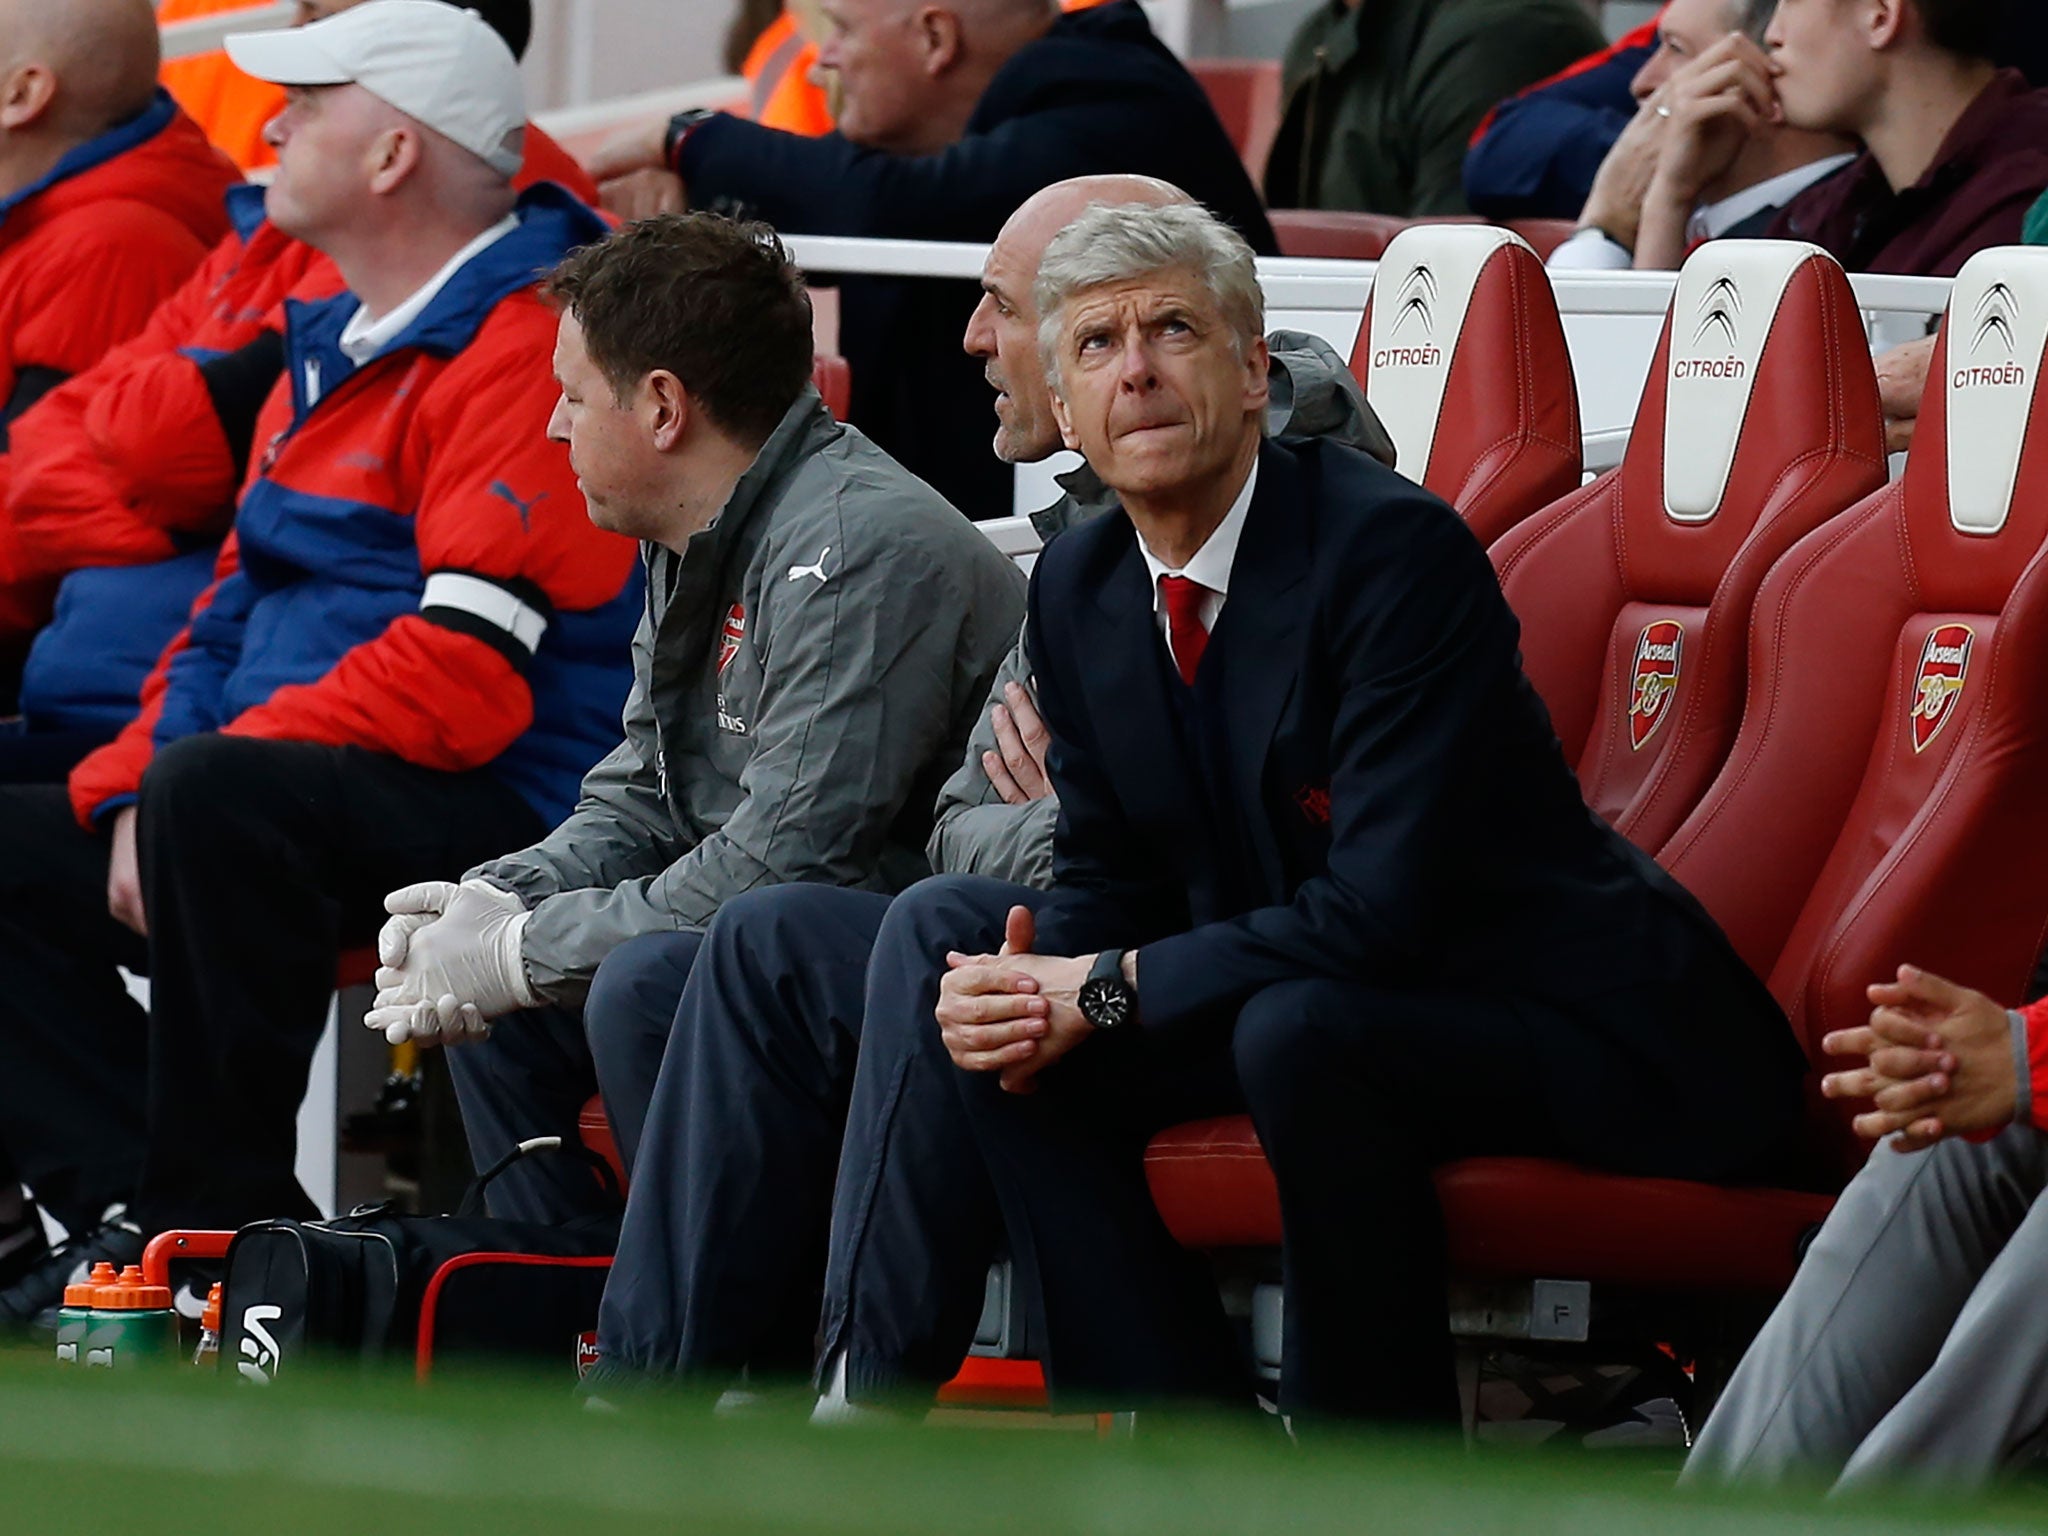 This could be the first season Arsenal miss out on a top-four finish under Arsene Wenger